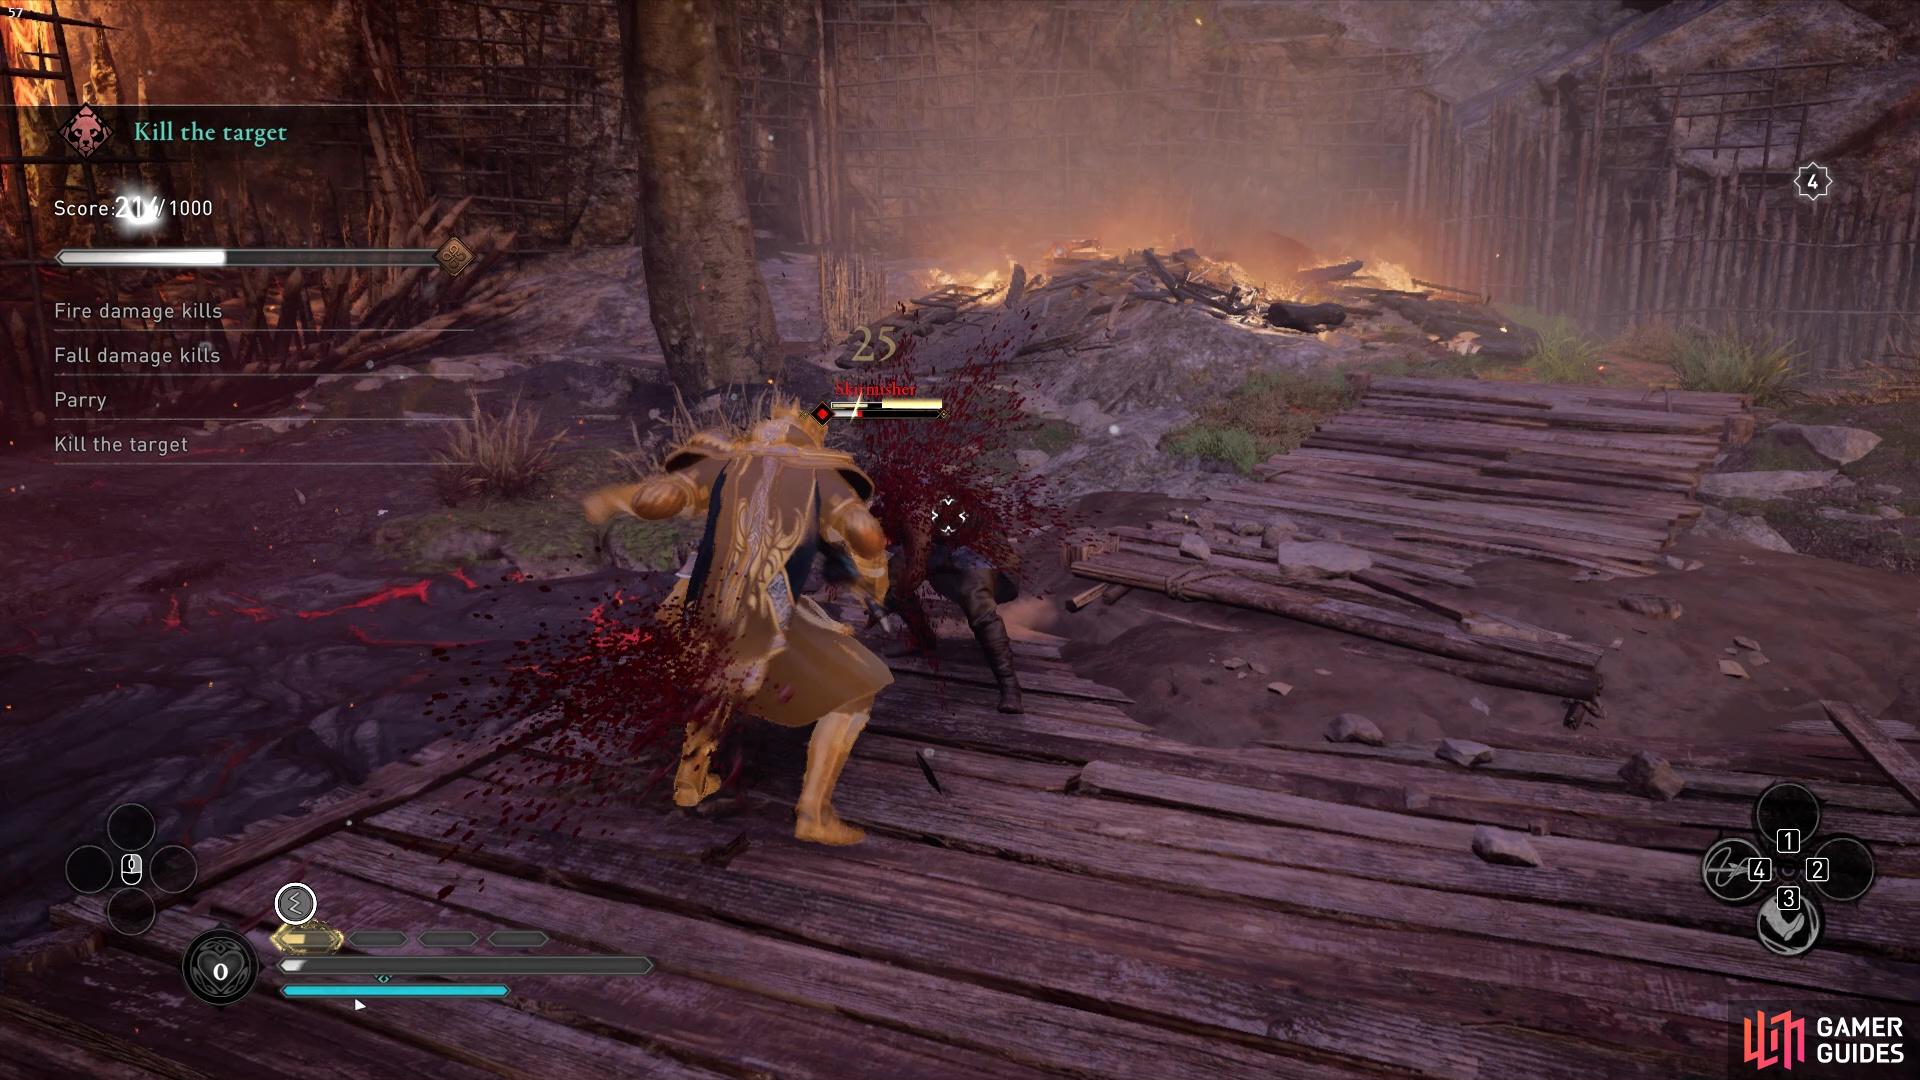 You'll also need to parry some enemies to earn points towards the parry objective.